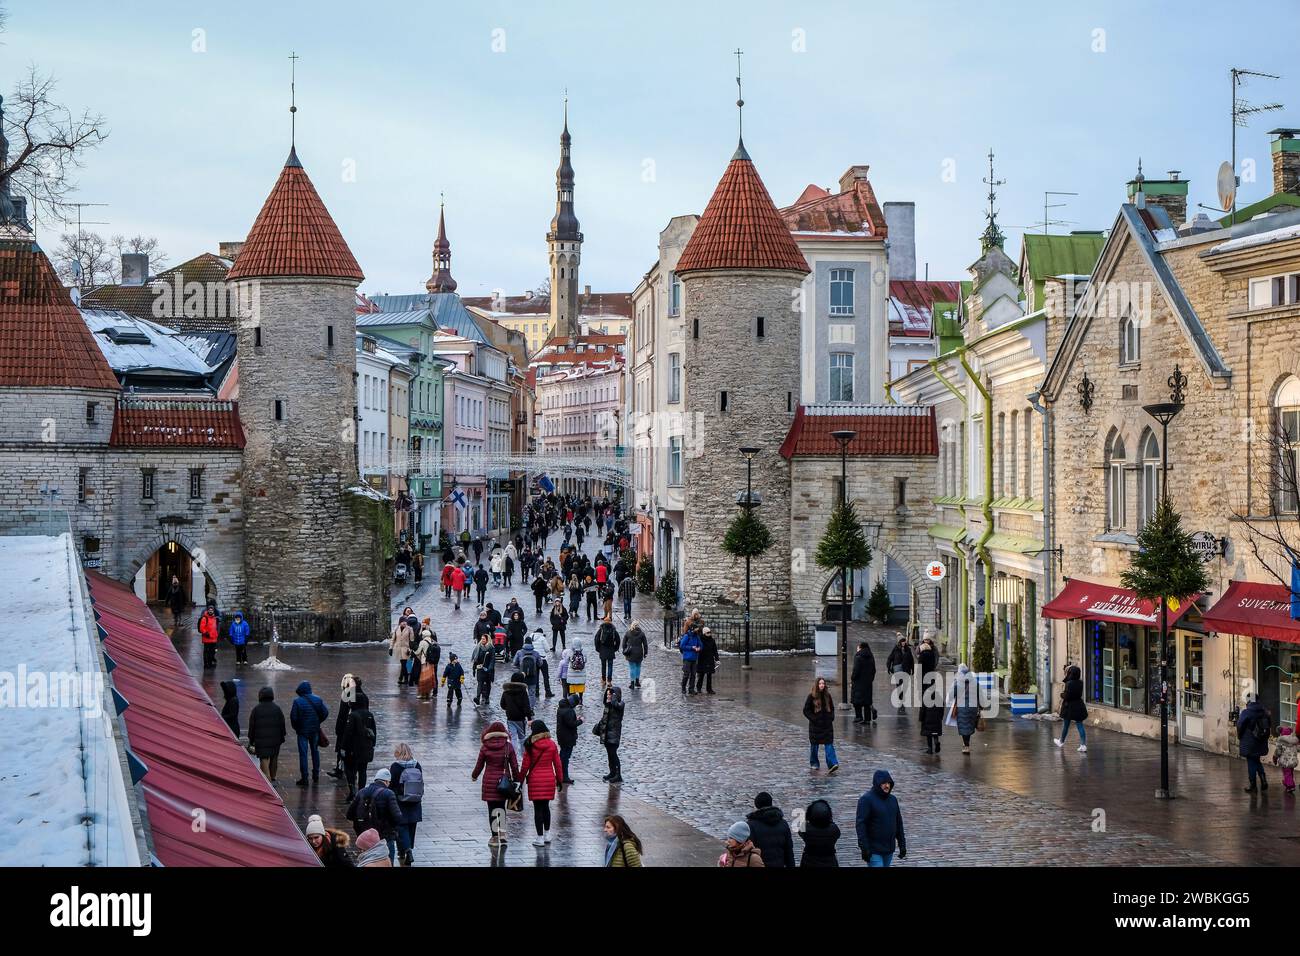 Tallinn, Estonia - Old Town of Tallinn, clay gate, watchtowers of the medieval city gate Viru, the Viru is the main shopping street in the city, behind the tower of the town hall at the town hall square. Stock Photo